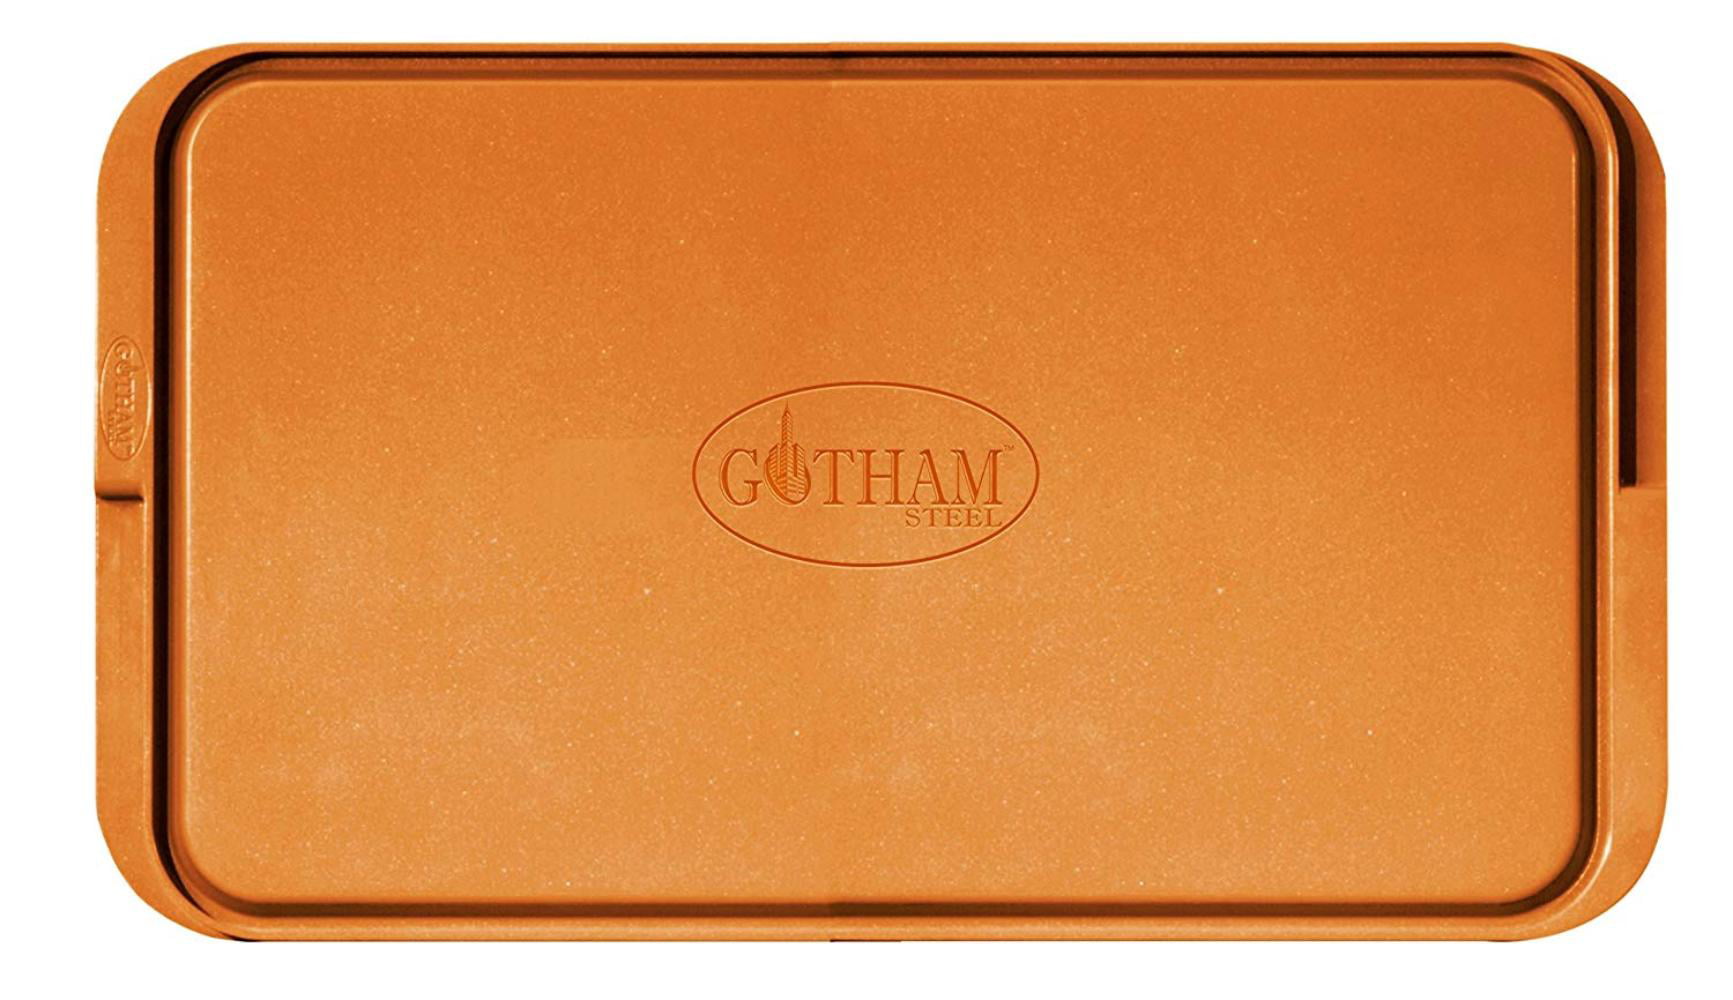 Gotham Steel Ceramic and Titanium Nonstick Double Sided Grill As Seen On TV-NEW